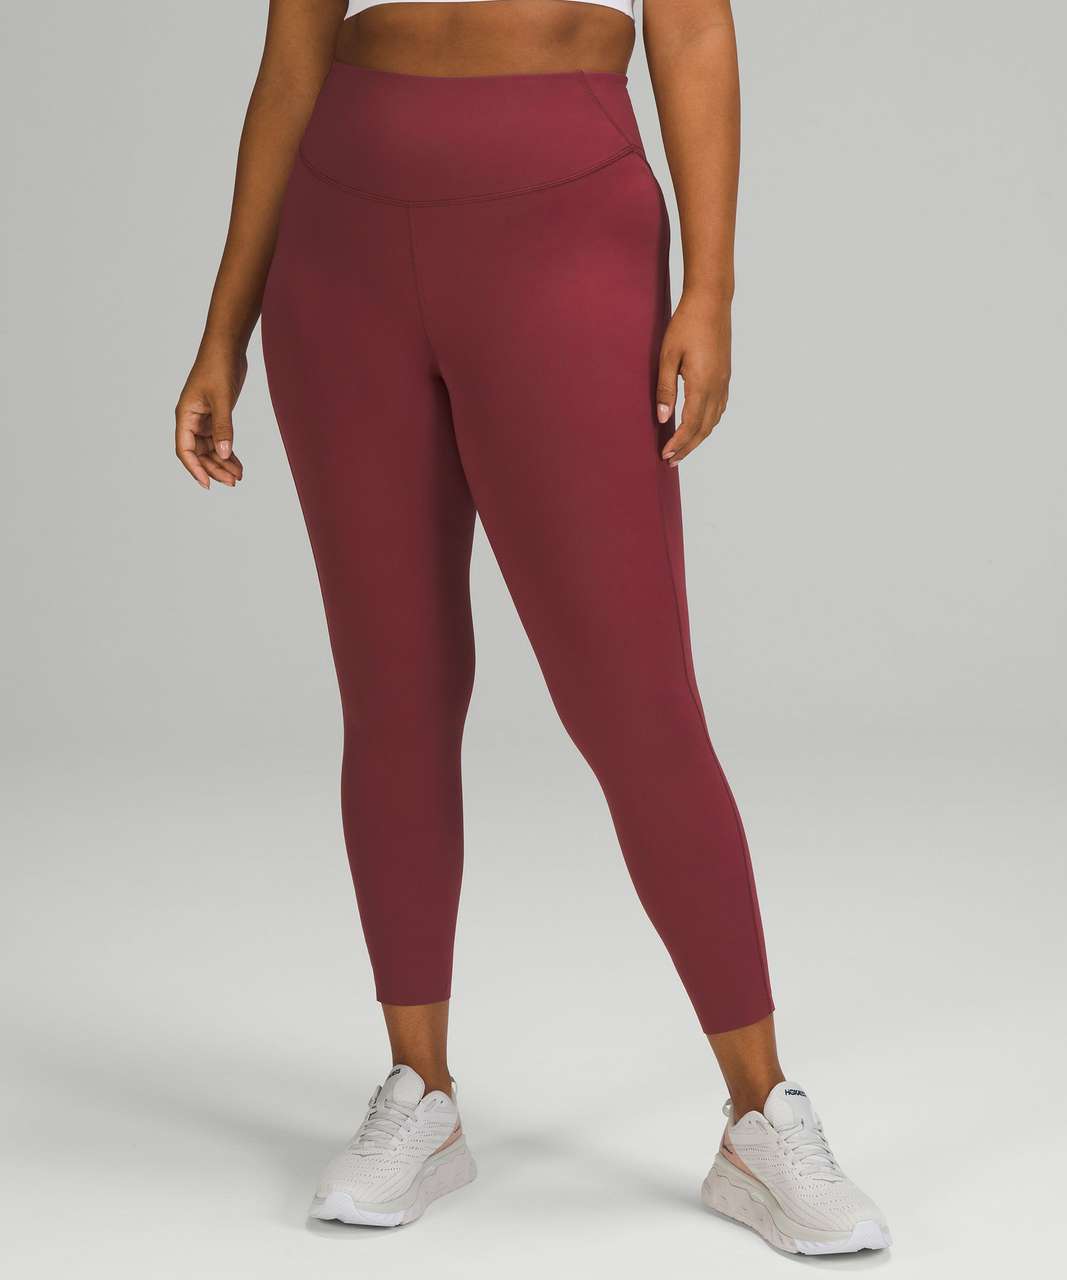 Lululemon Base Pace High-Rise Running Tight 25" - Mulled Wine